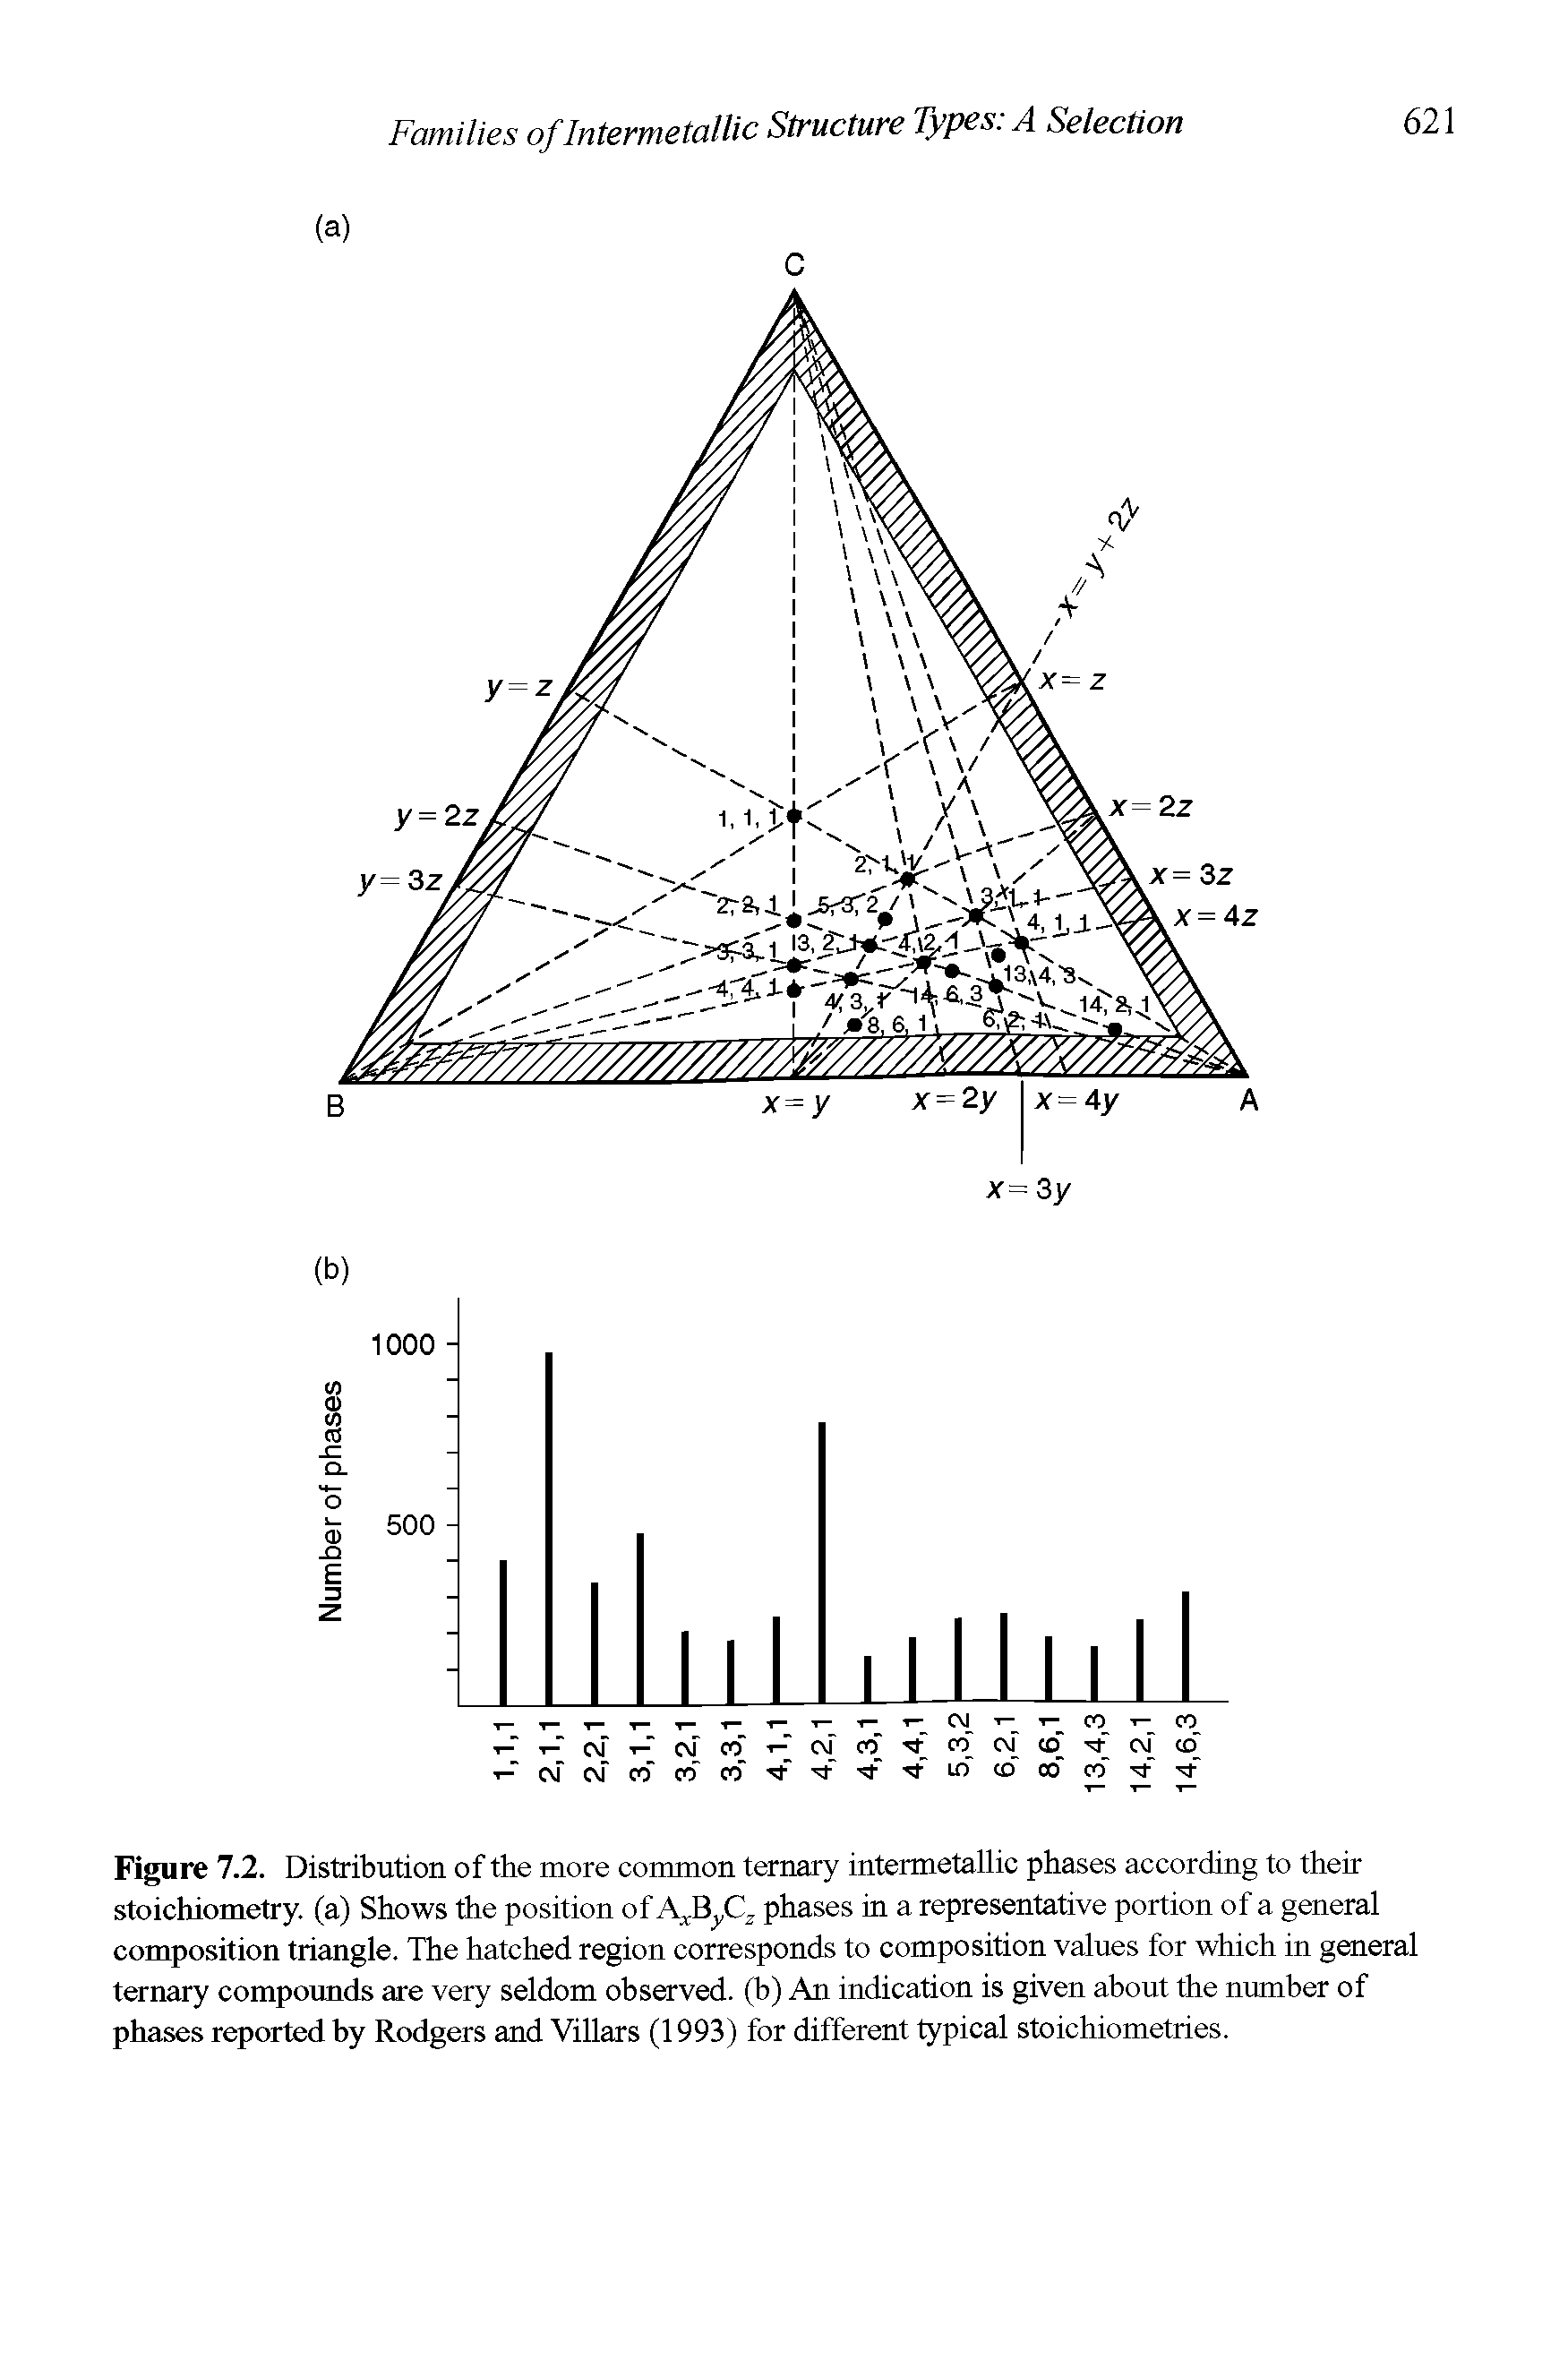 Figure 7.2. Distribution of the more common ternary intermetallic phases according to their stoichiometry, (a) Shows the position of AxByC2 phases in a representative portion of a general composition triangle. The hatched region corresponds to composition values for which in general ternary compounds are very seldom observed, (b) An indication is given about the number of phases reported by Rodgers and Villars (1993) for different typical stoichiometries.